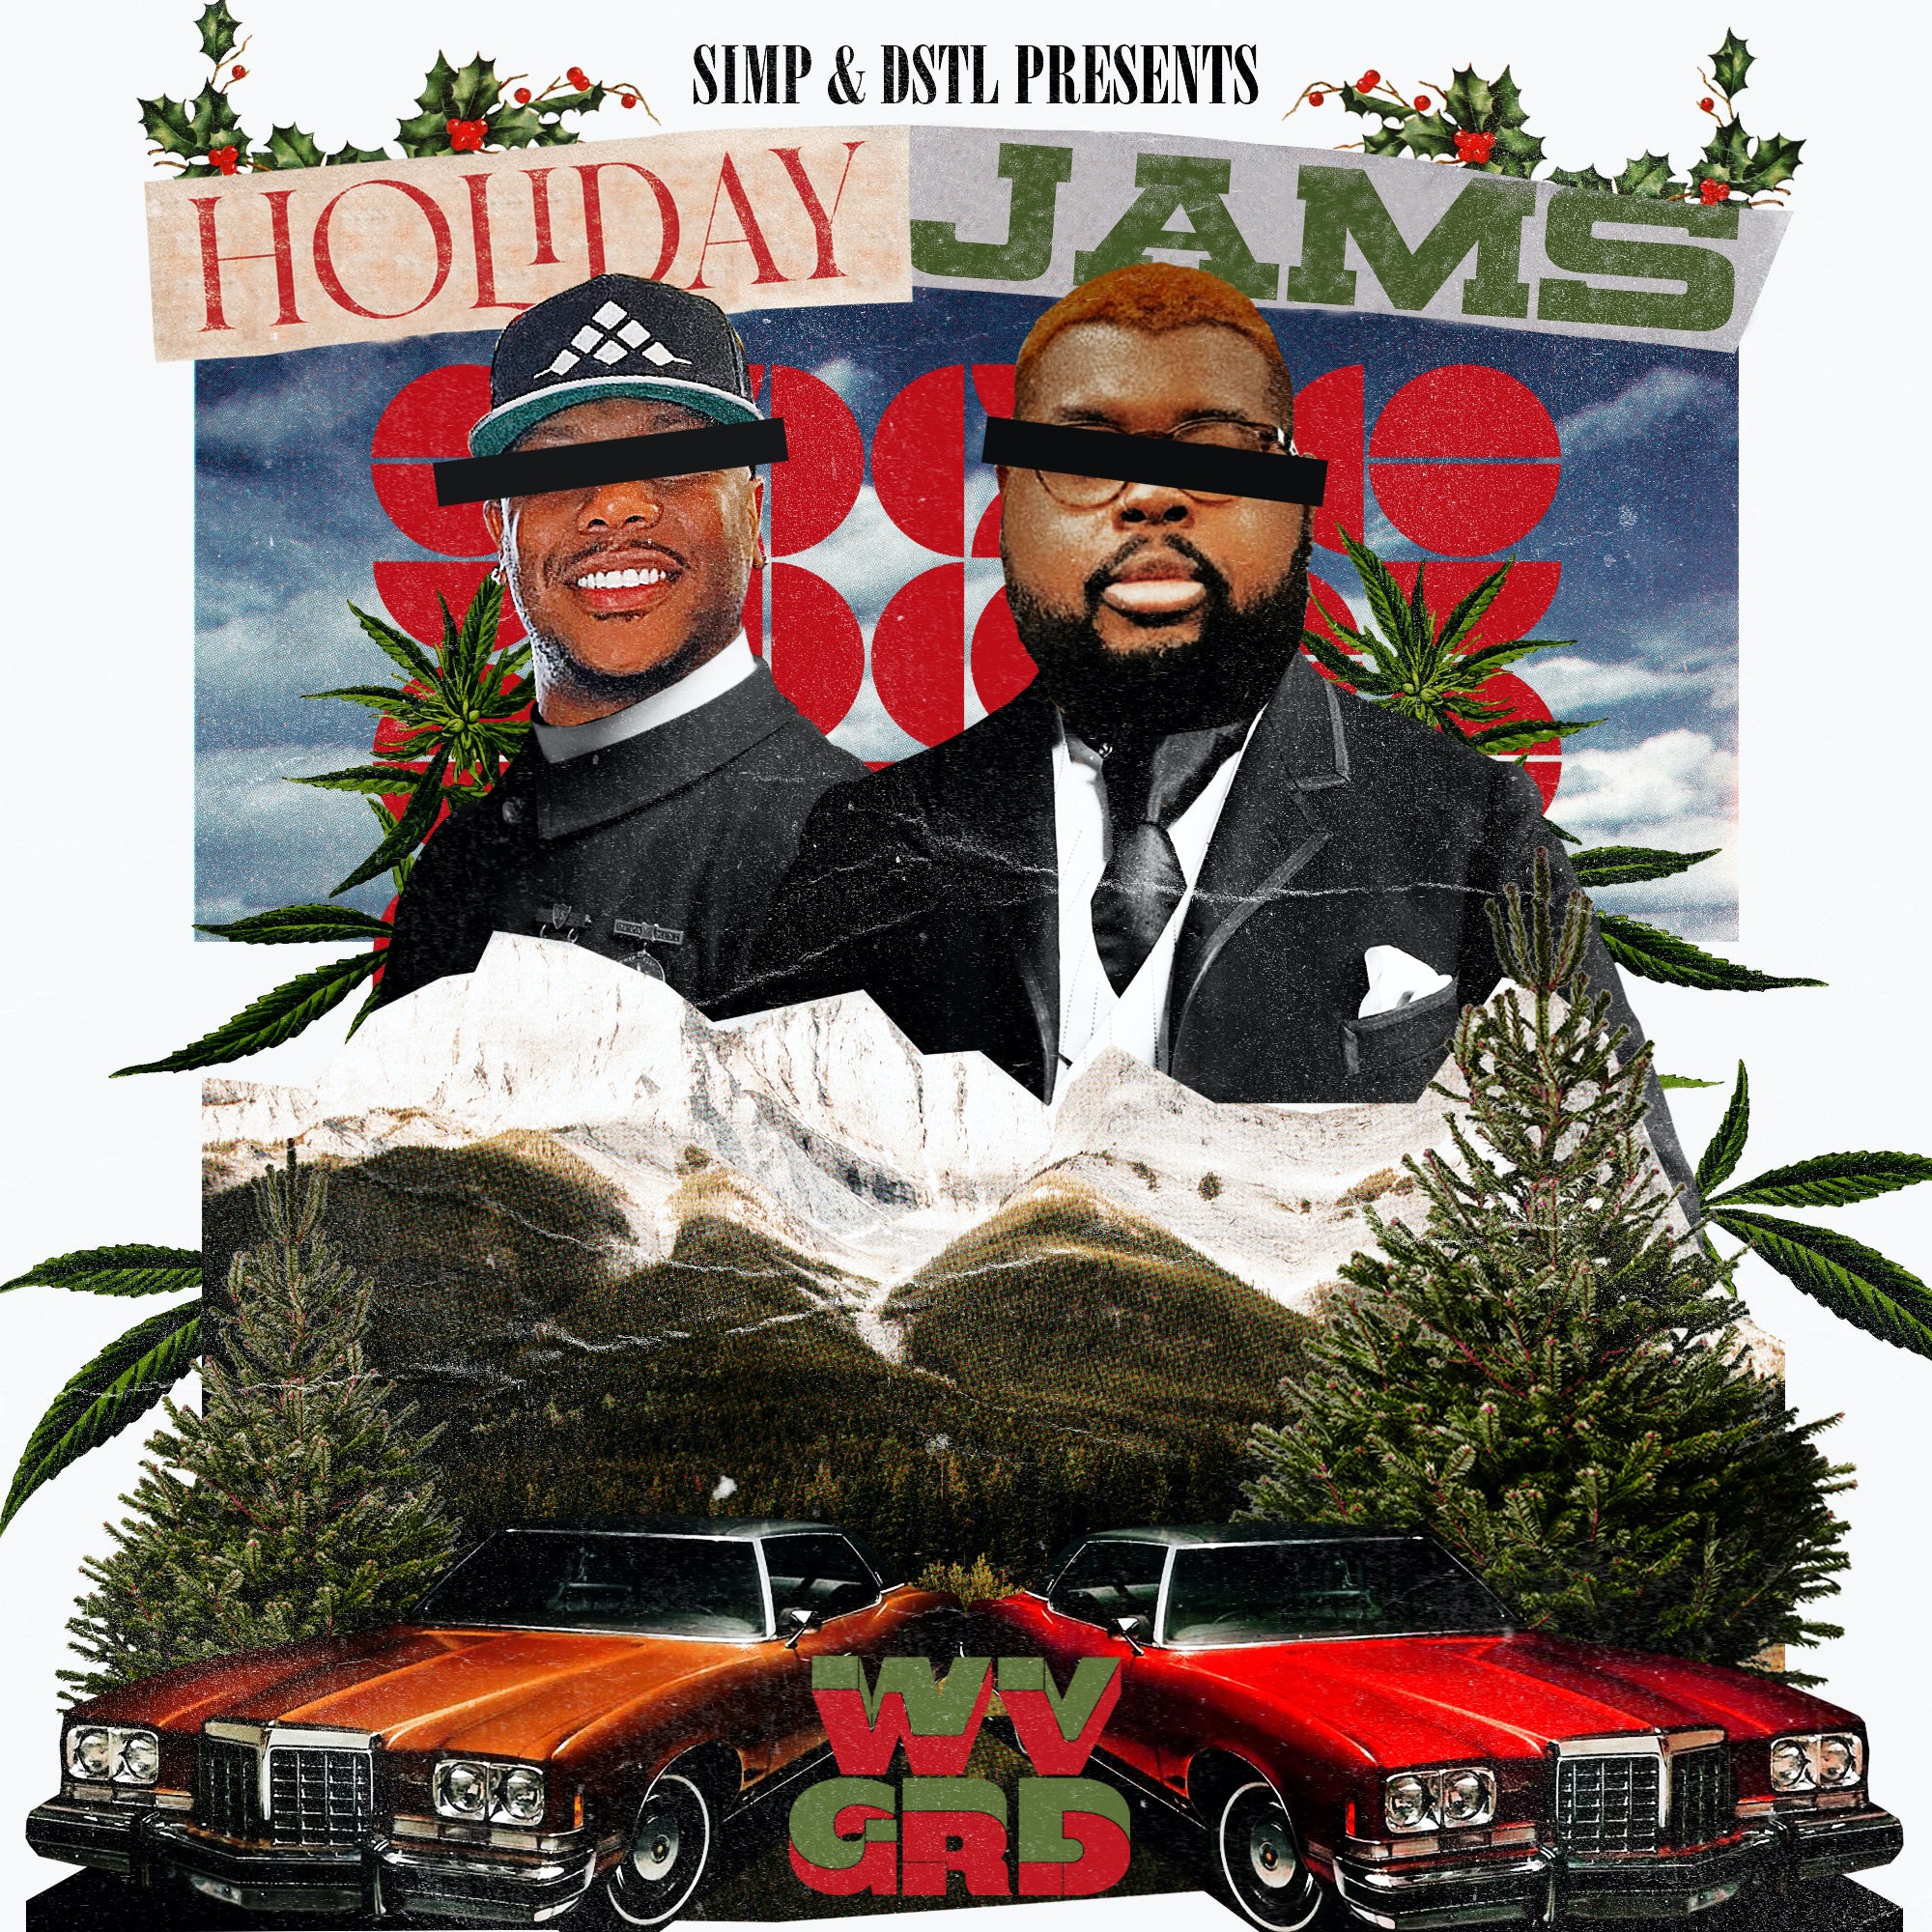 HOLIDAY JAMS by THE WVGRD